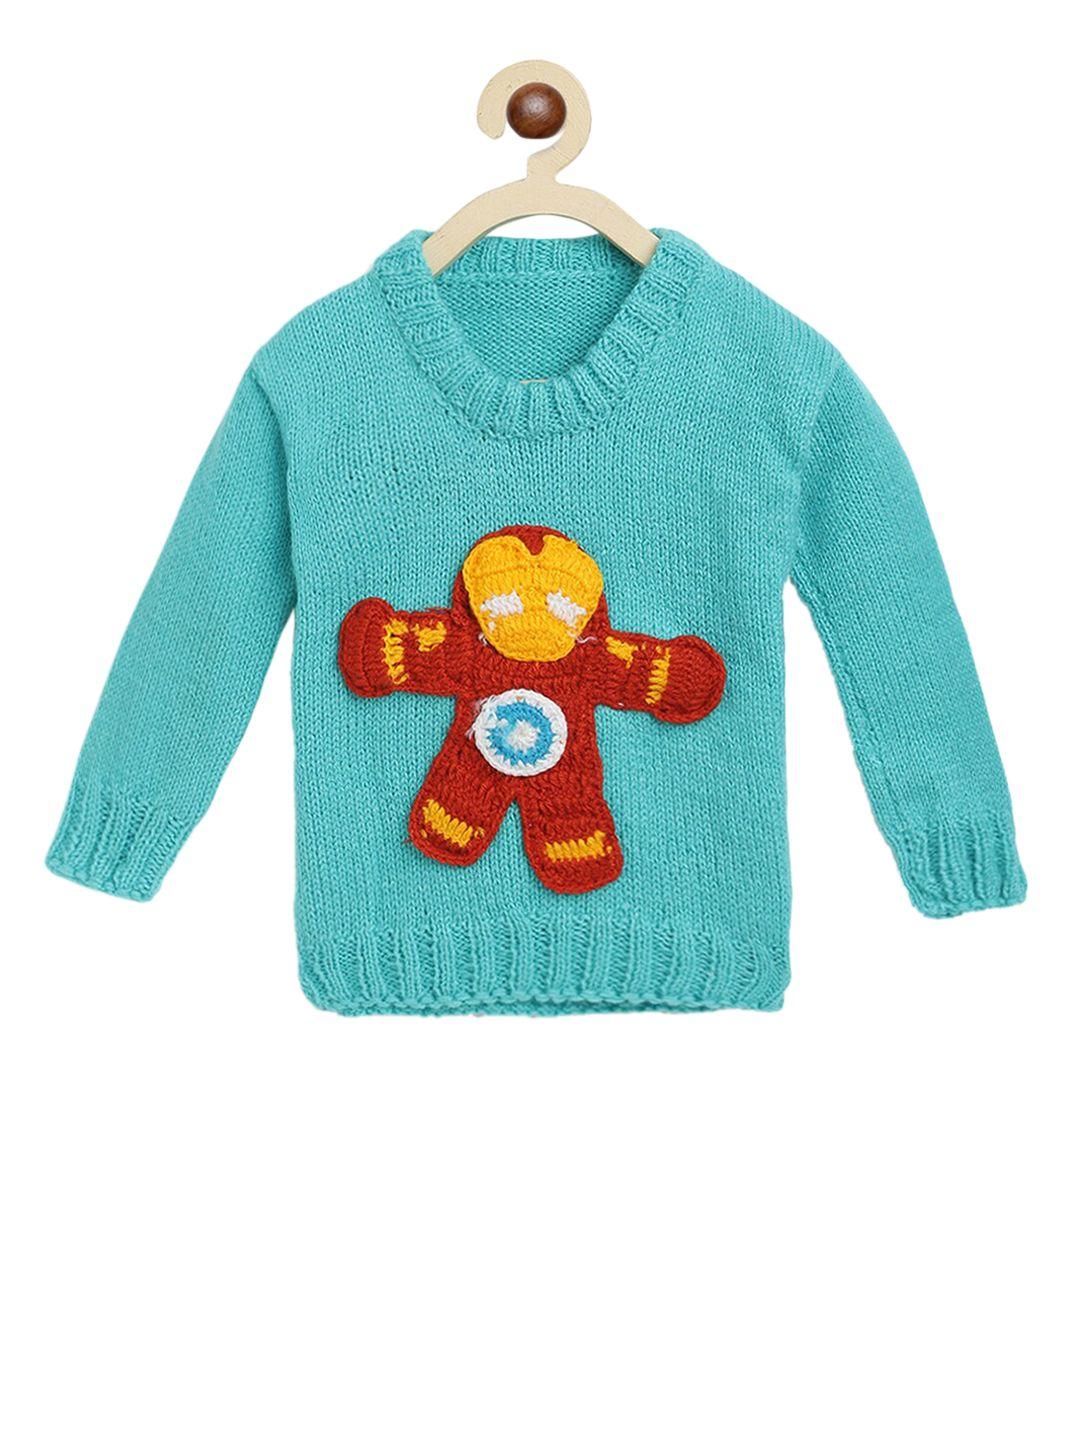 chutput kids blue & red hand knitted pullover sweater